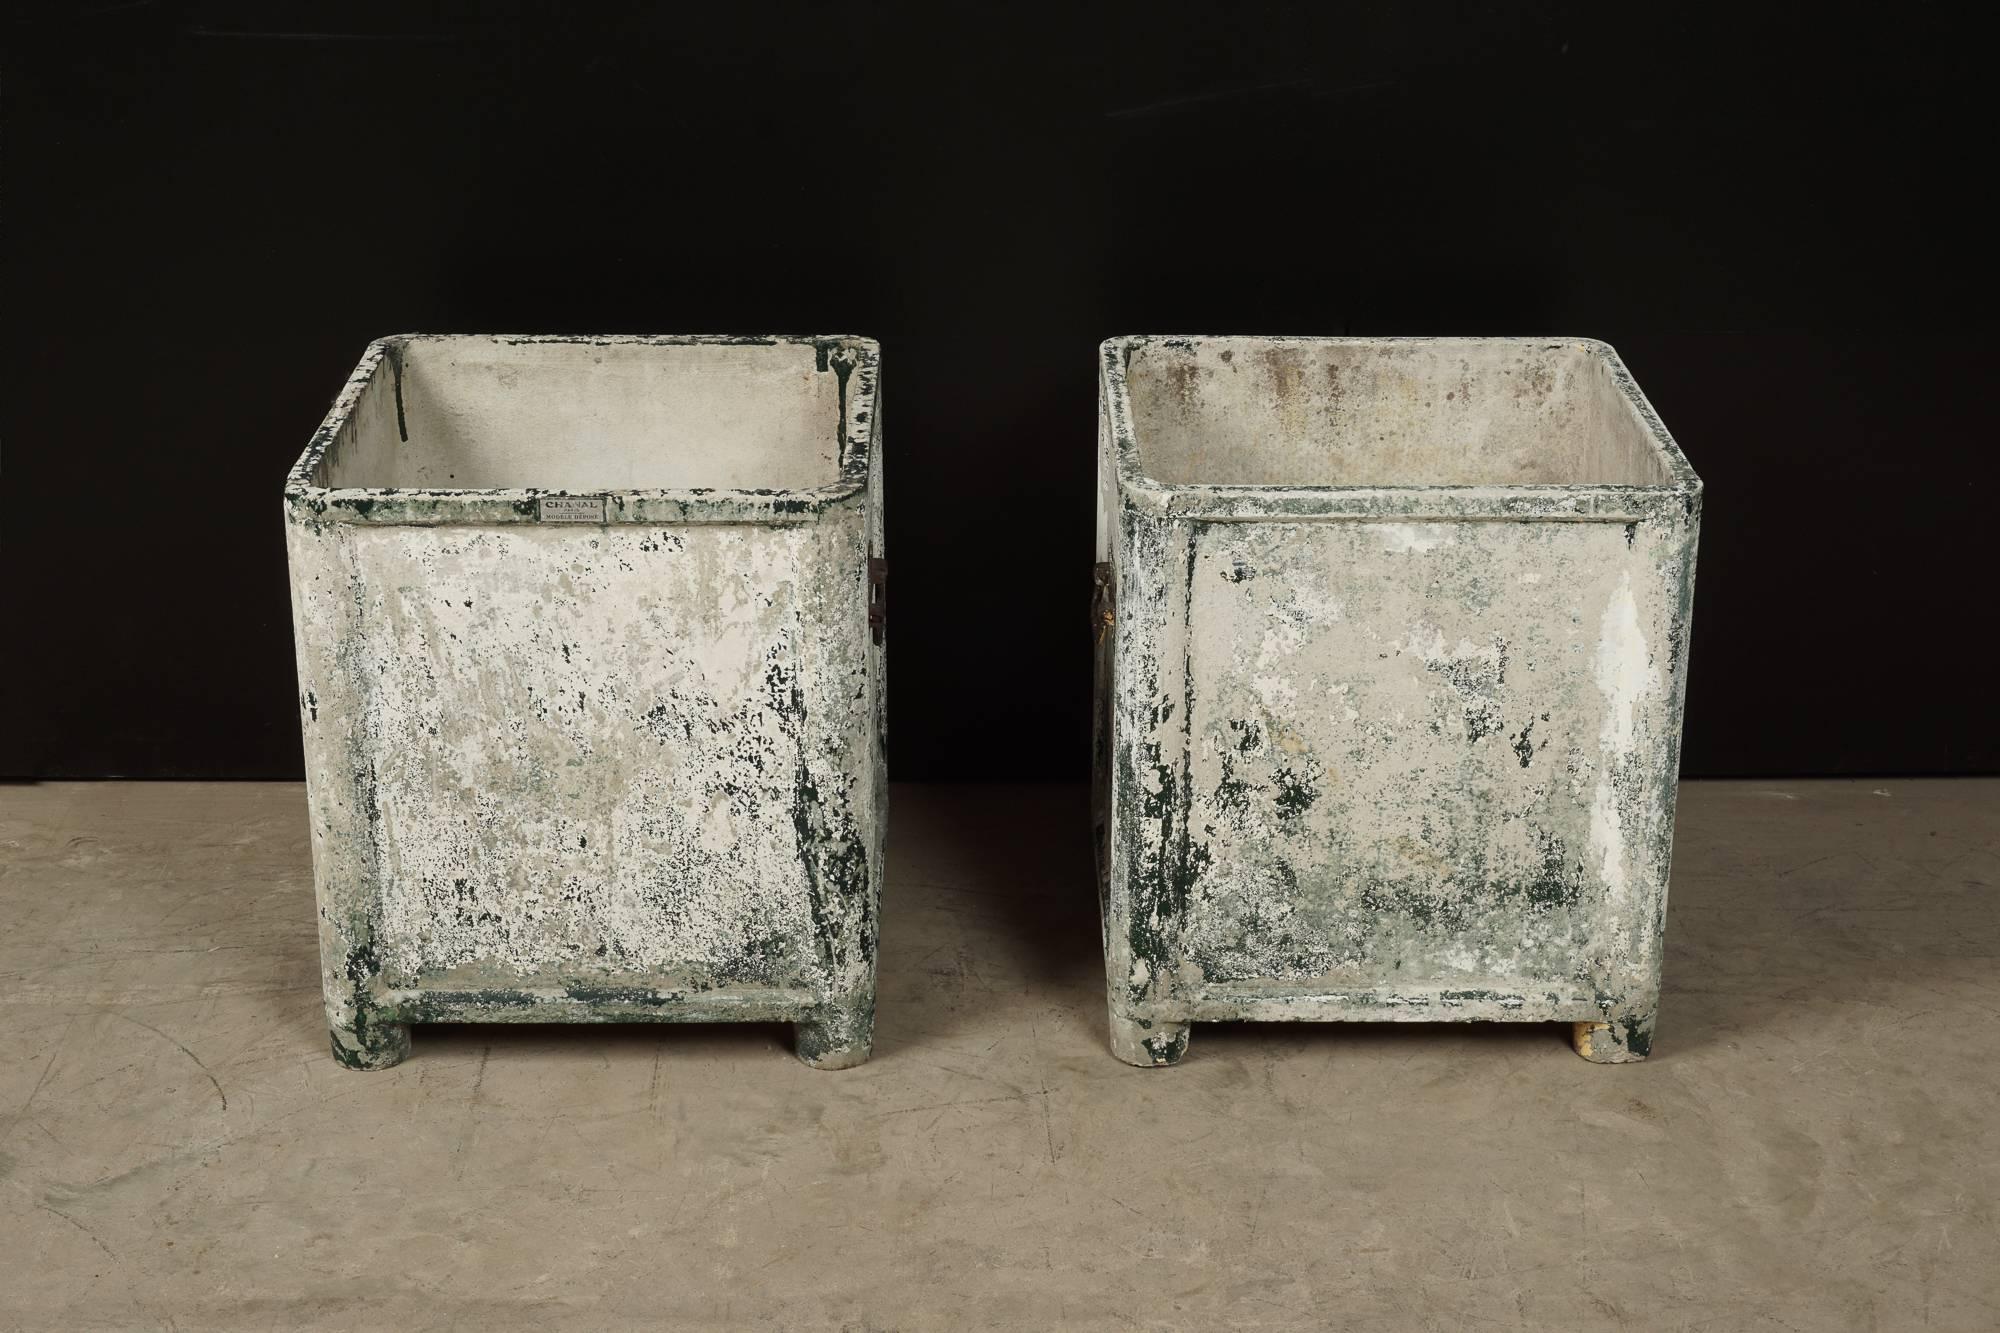 Pair of plaster and fiberglass planters manufactured by Chanal, Paris. Original hardware and patina.